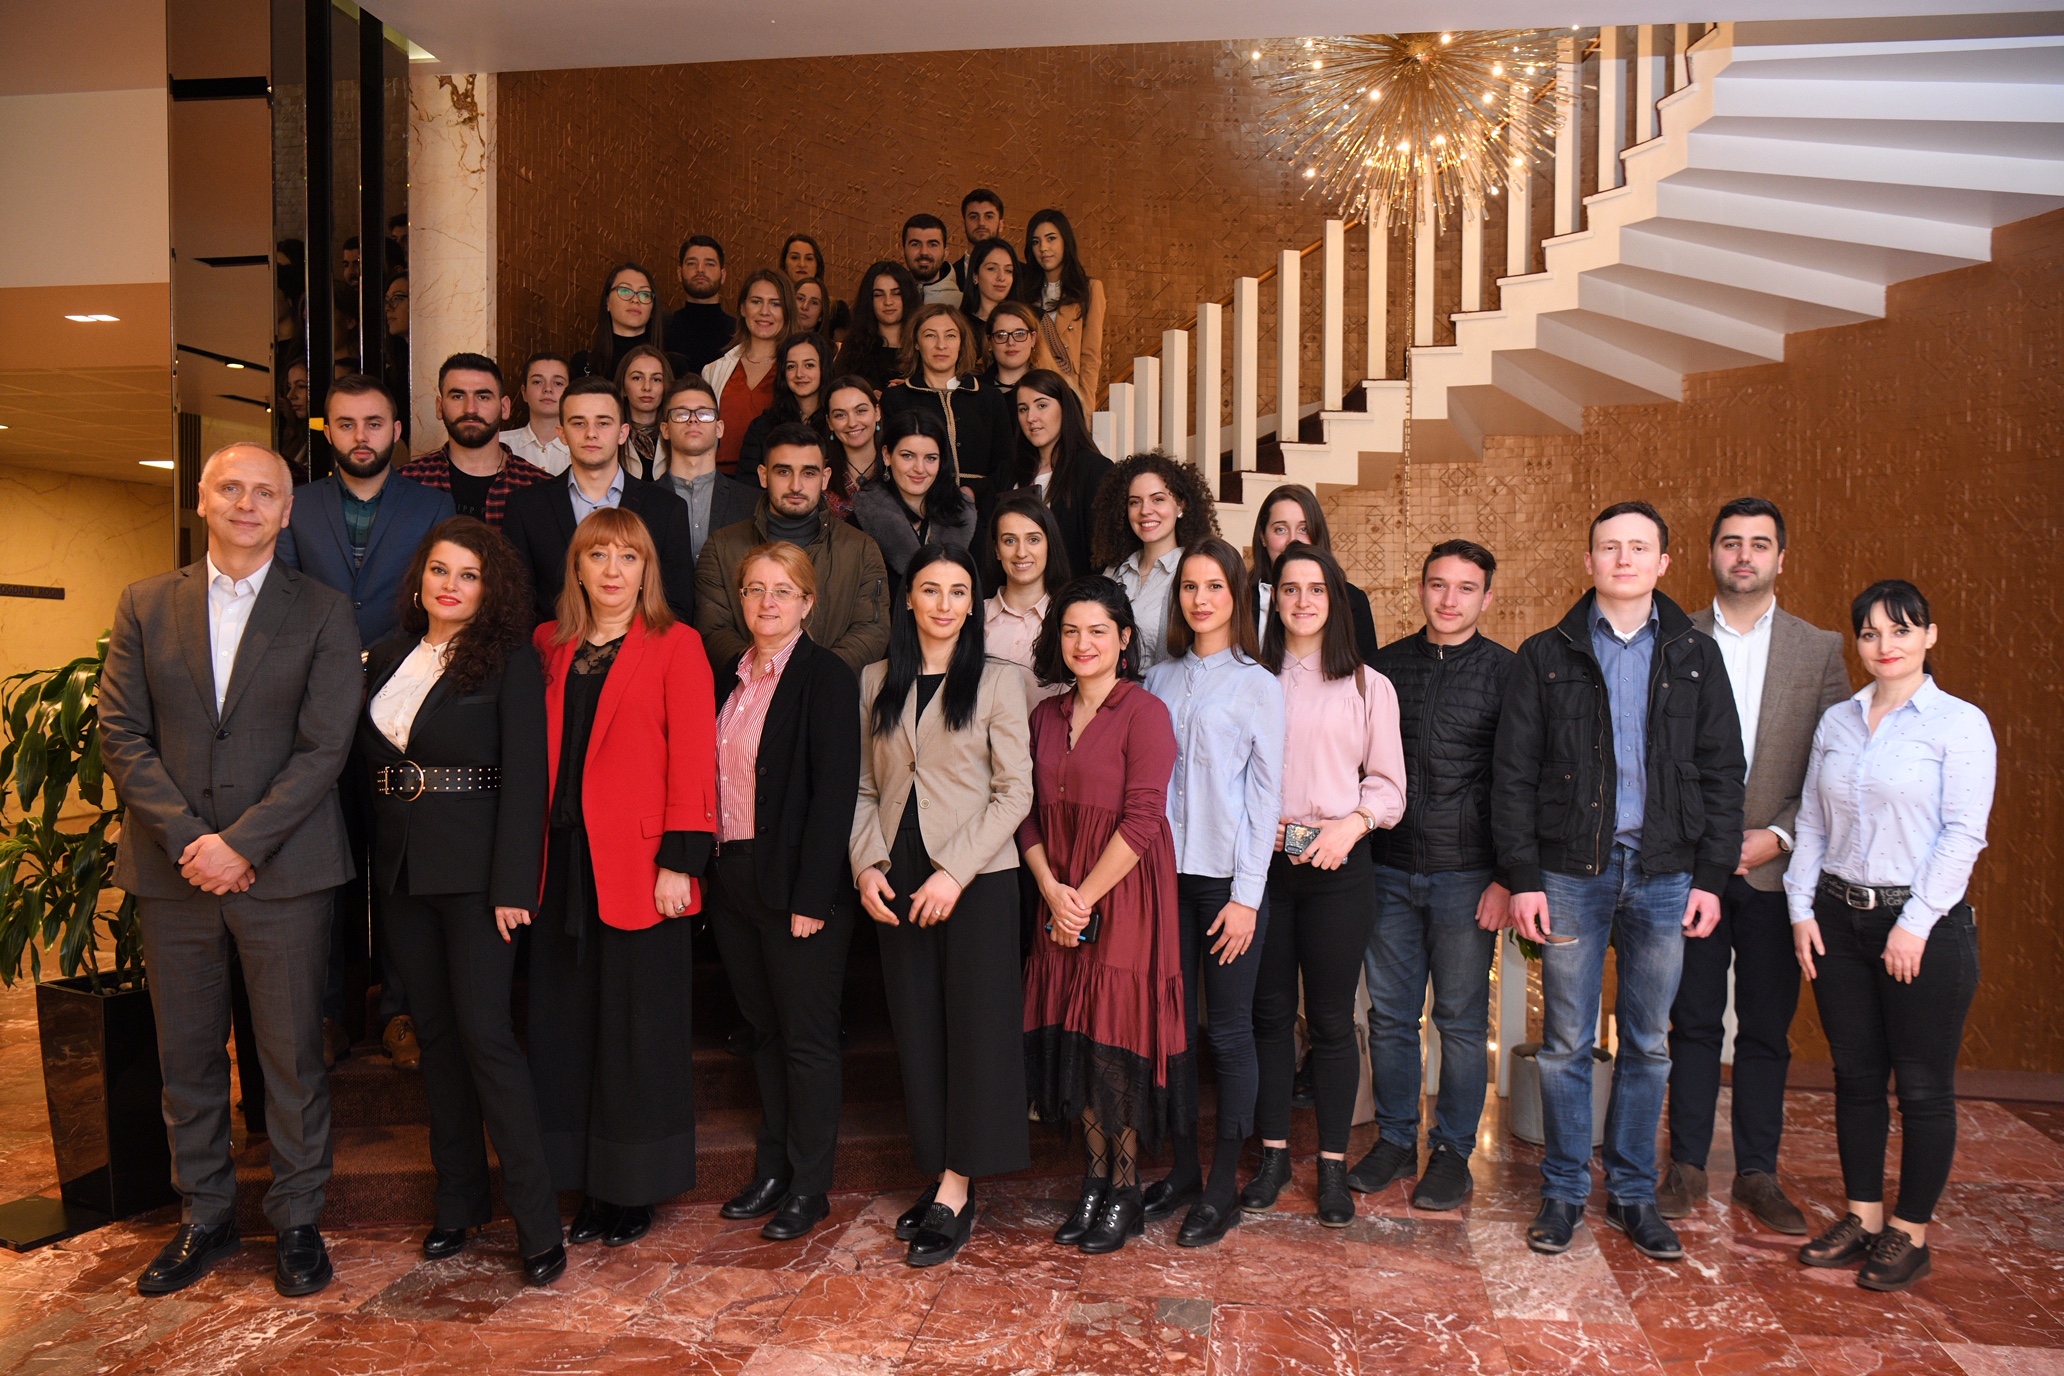 Participants of the Community Dialogue with Youth at Risk held in Tirana on 5 March 2020 (Photo: RCC/Armand Abazaj)